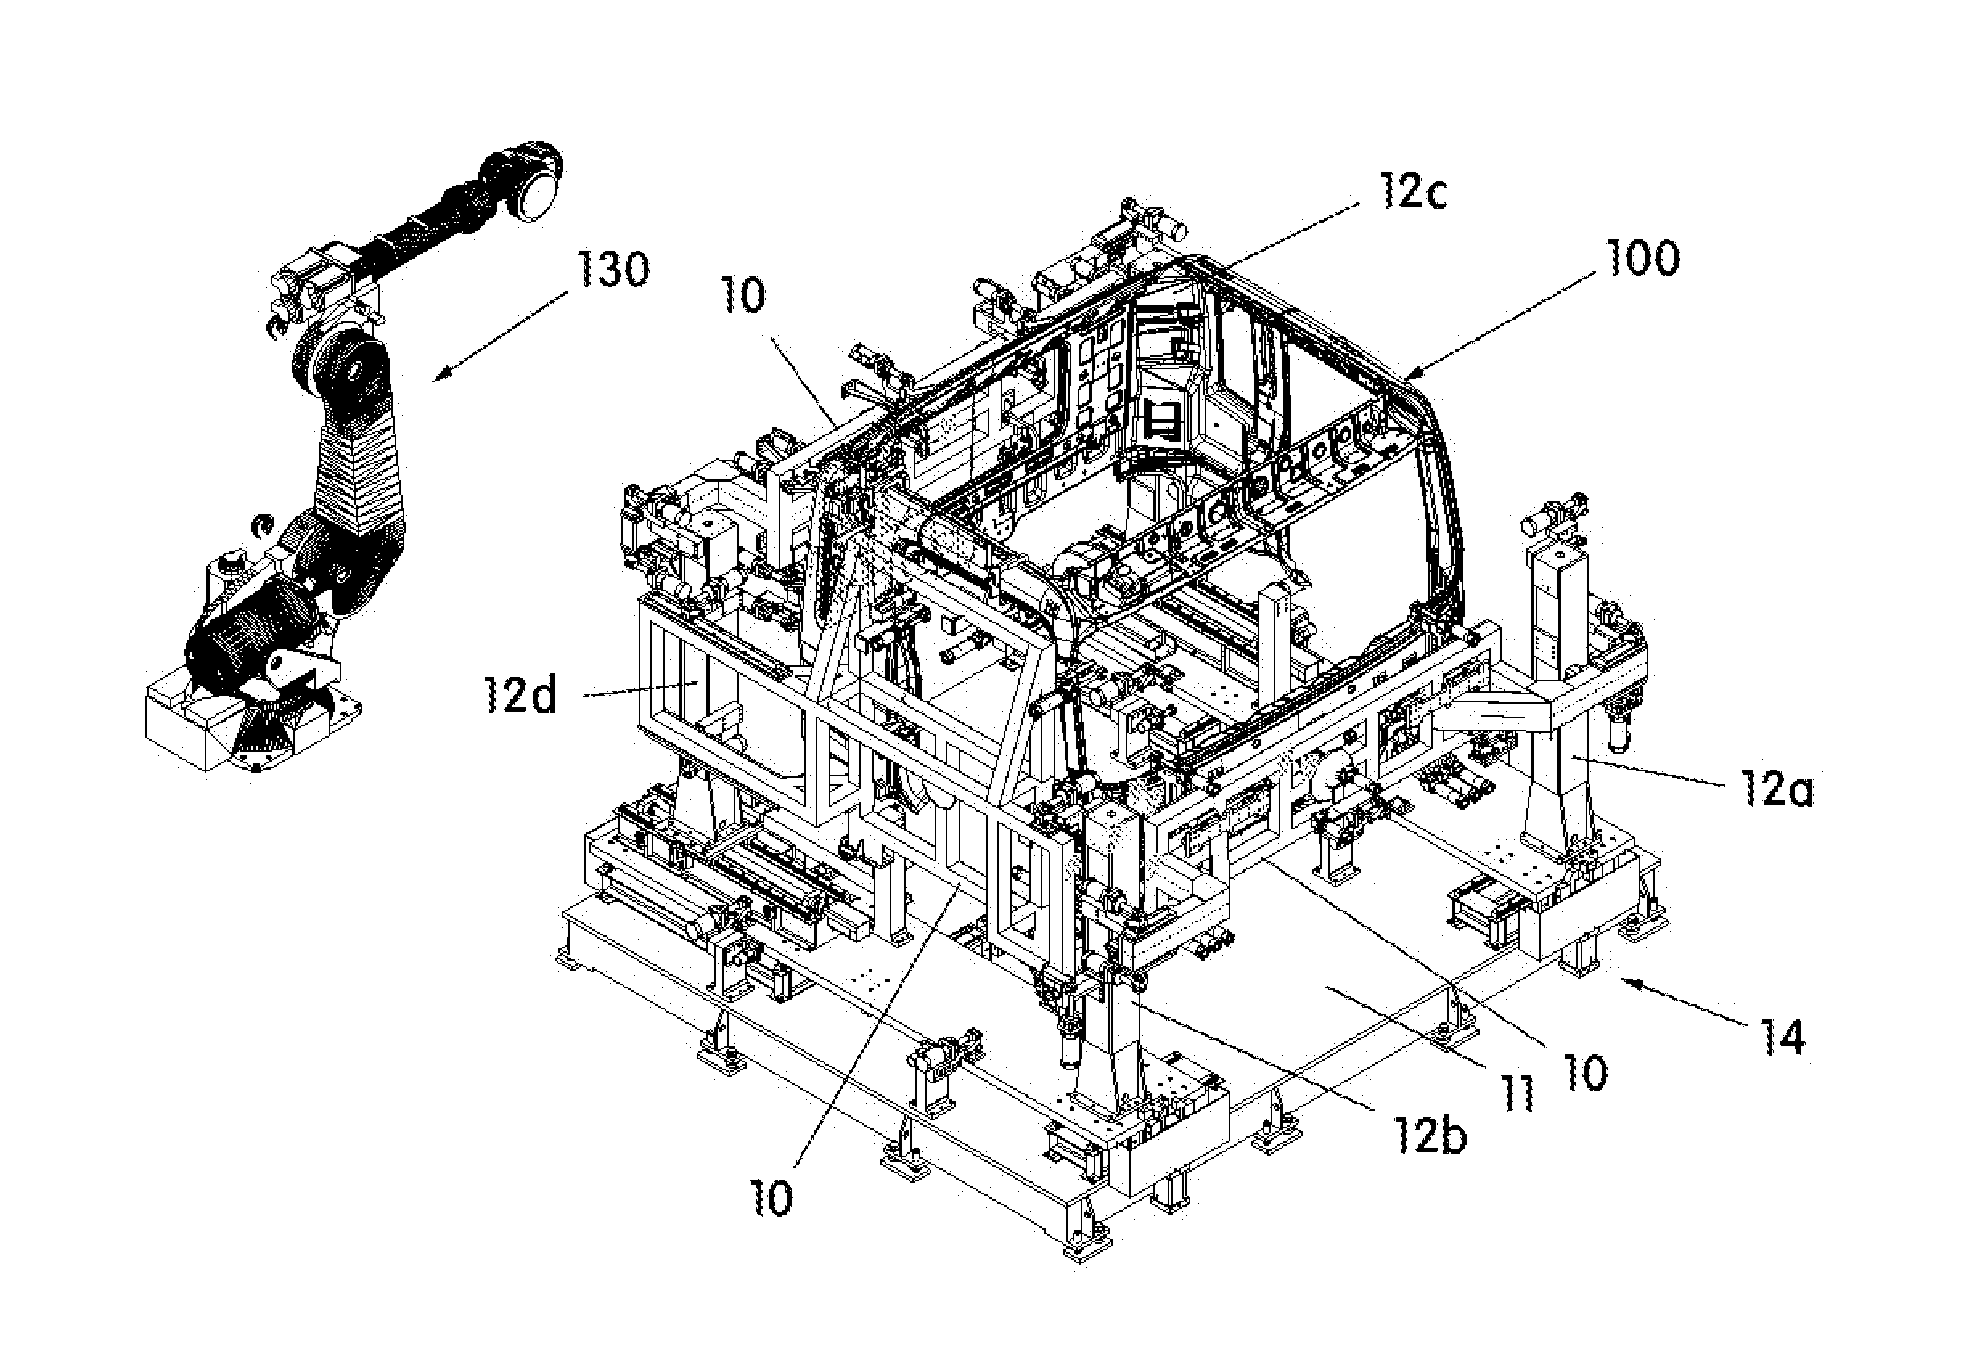 Complete body assembling apparatus for various vehicle models